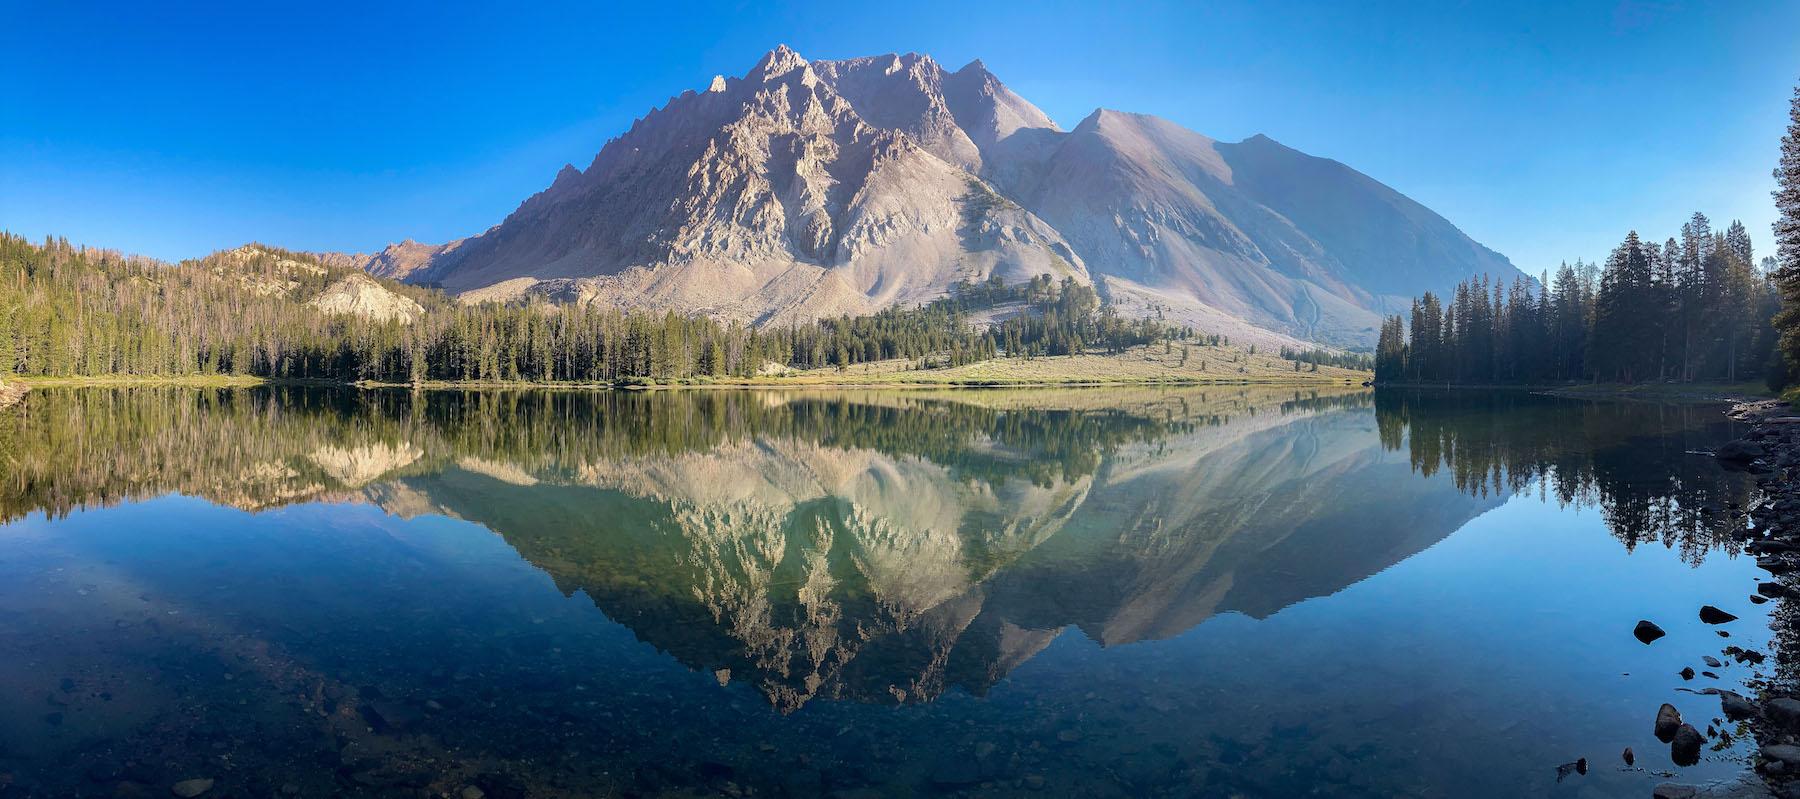 Reflection of Castle Peak in an unamed lake in the Chamberlain Basin